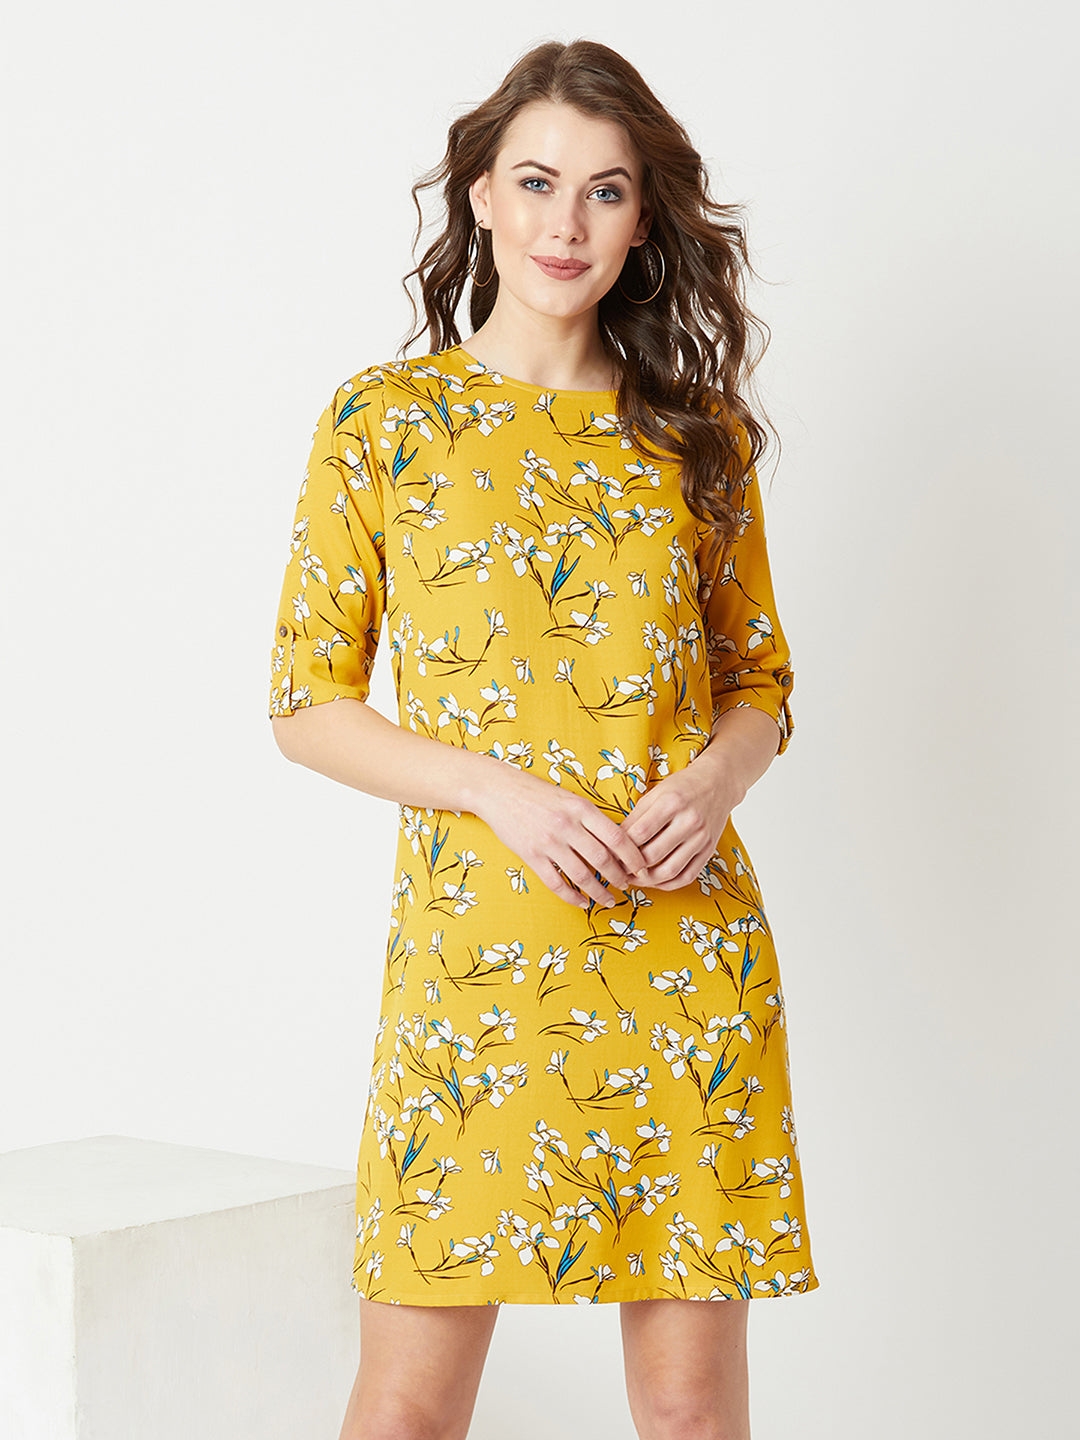 Multicolored With A Yellow Base Round Neck 3/4 Sleeve Floral Knee-Long Shift Dress